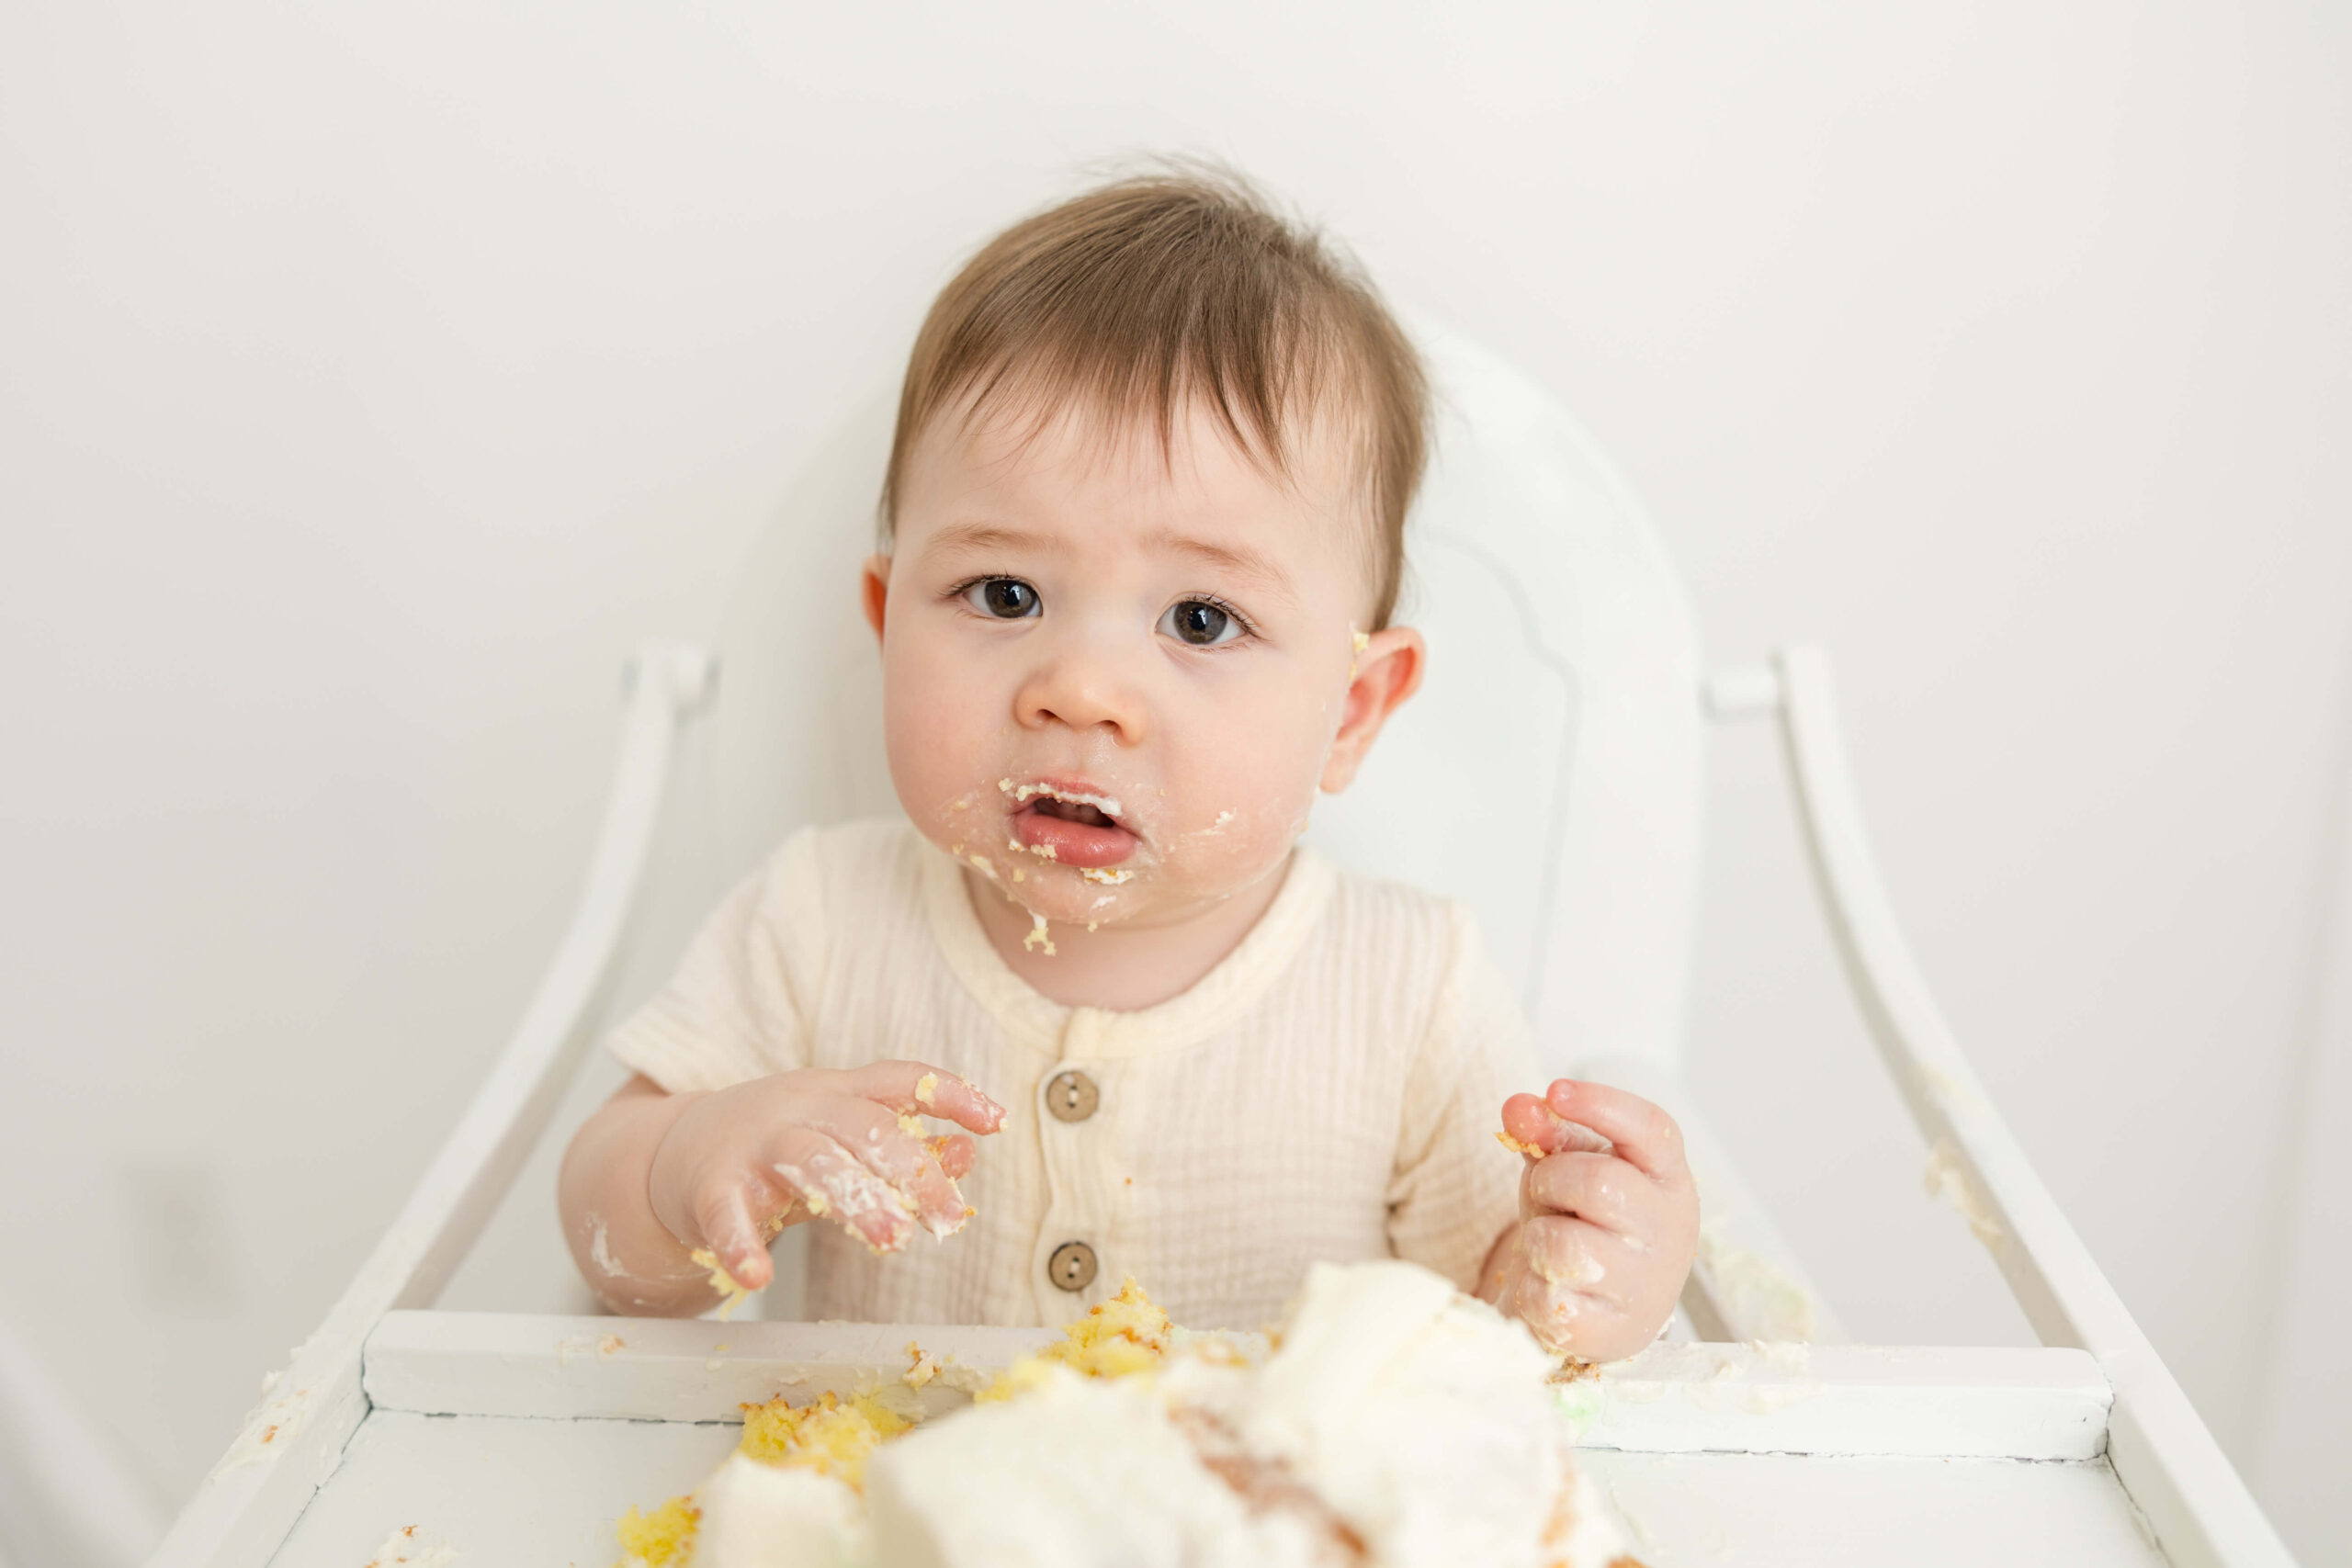 Little boy in white high chair with cake on his face from his cake smash session. 